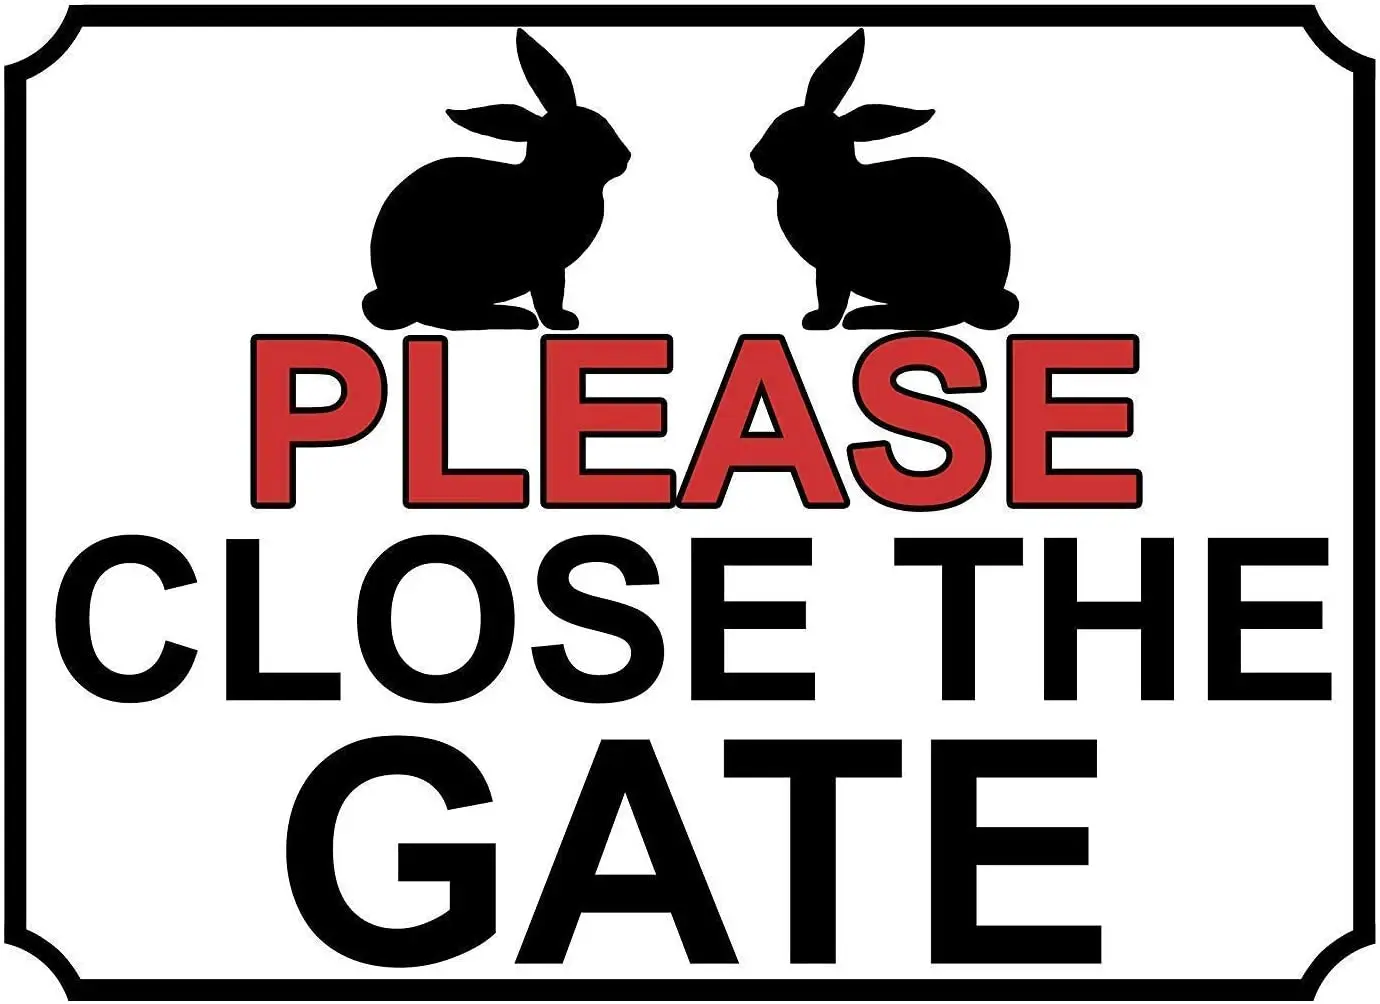 

Please Close The Gate Vintage Retro Metal Tin Sign Vintage Look Sign Poster Plaque for Bar Cafe Garage Home Outdoor Courtyard